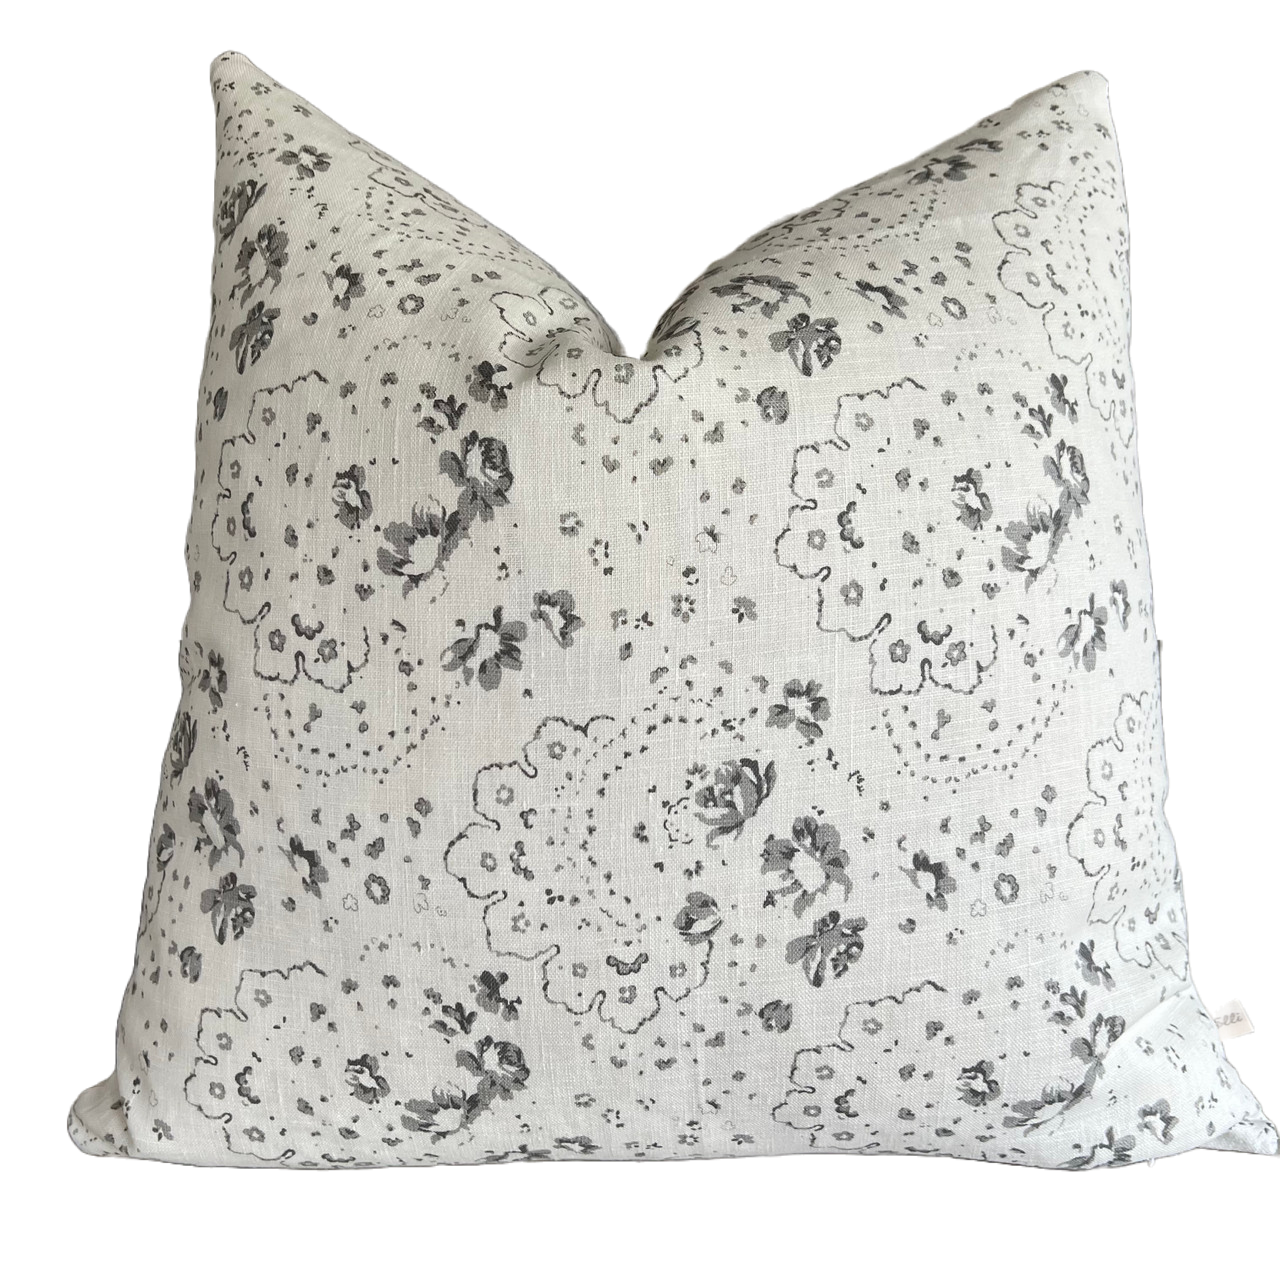 Cabbages and Roses New Penny Charcoal on White Linen Cushion Cover